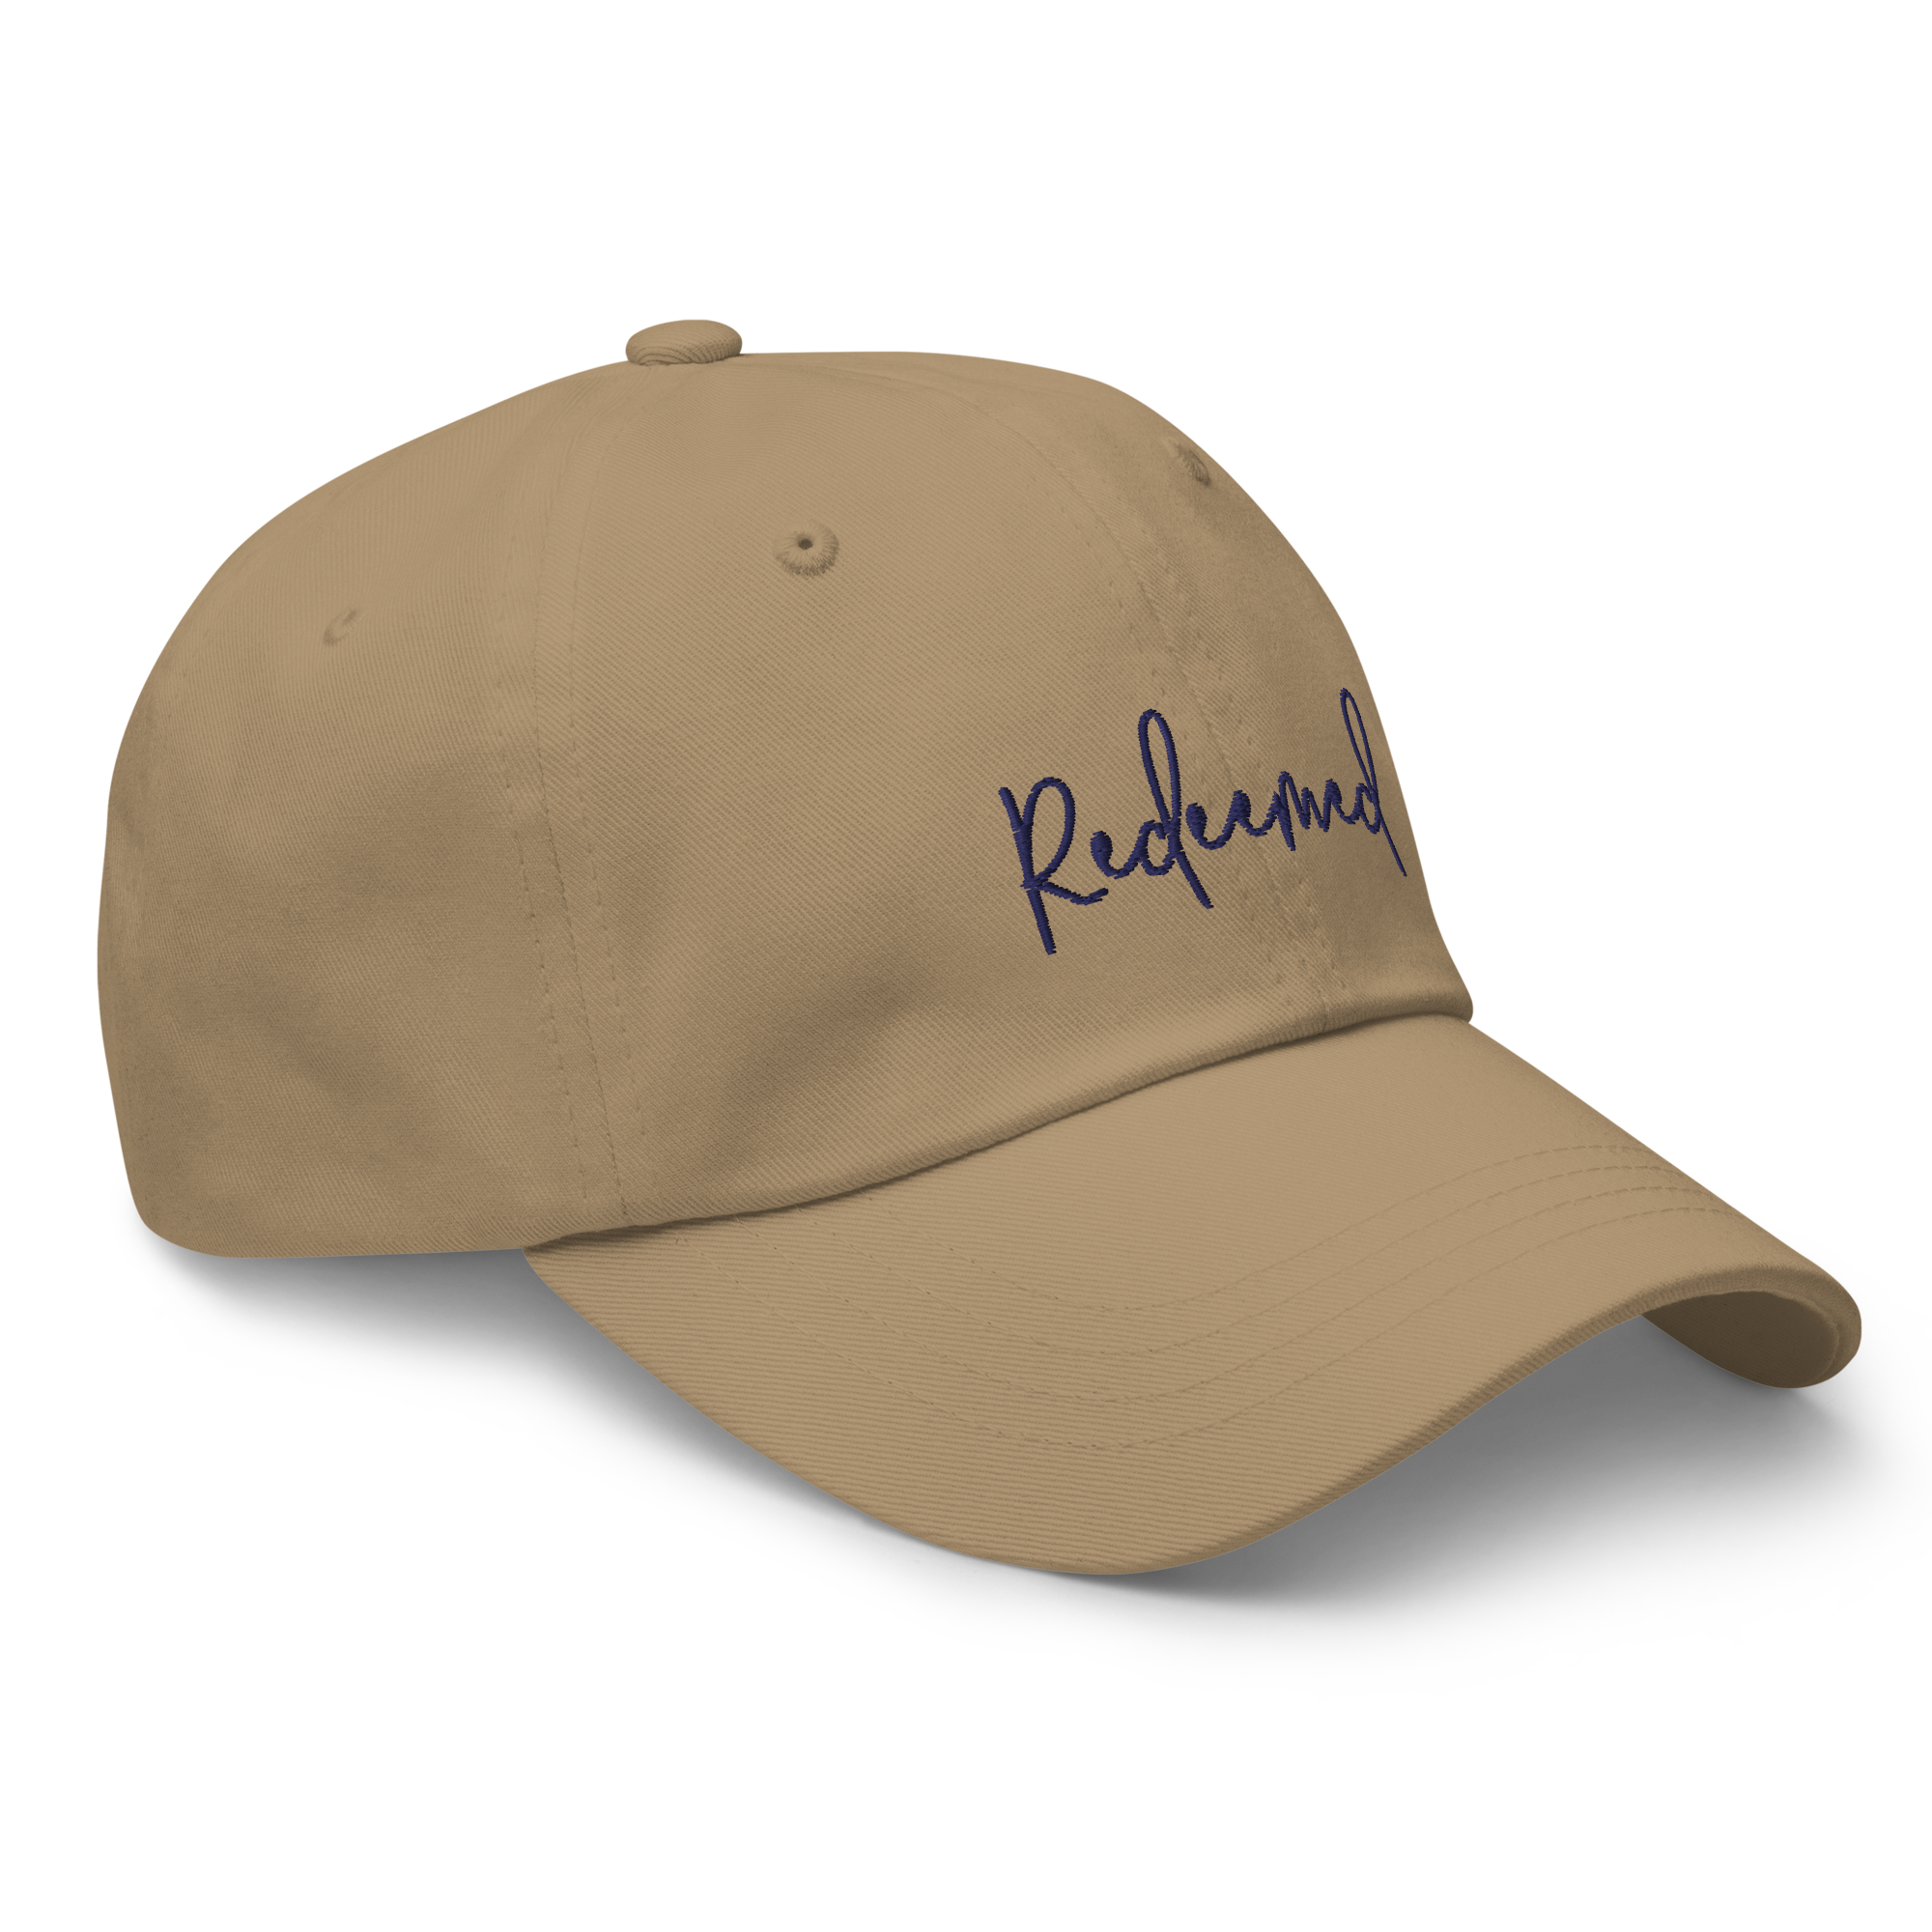 Redeemed (Navy Embroidered) Hat